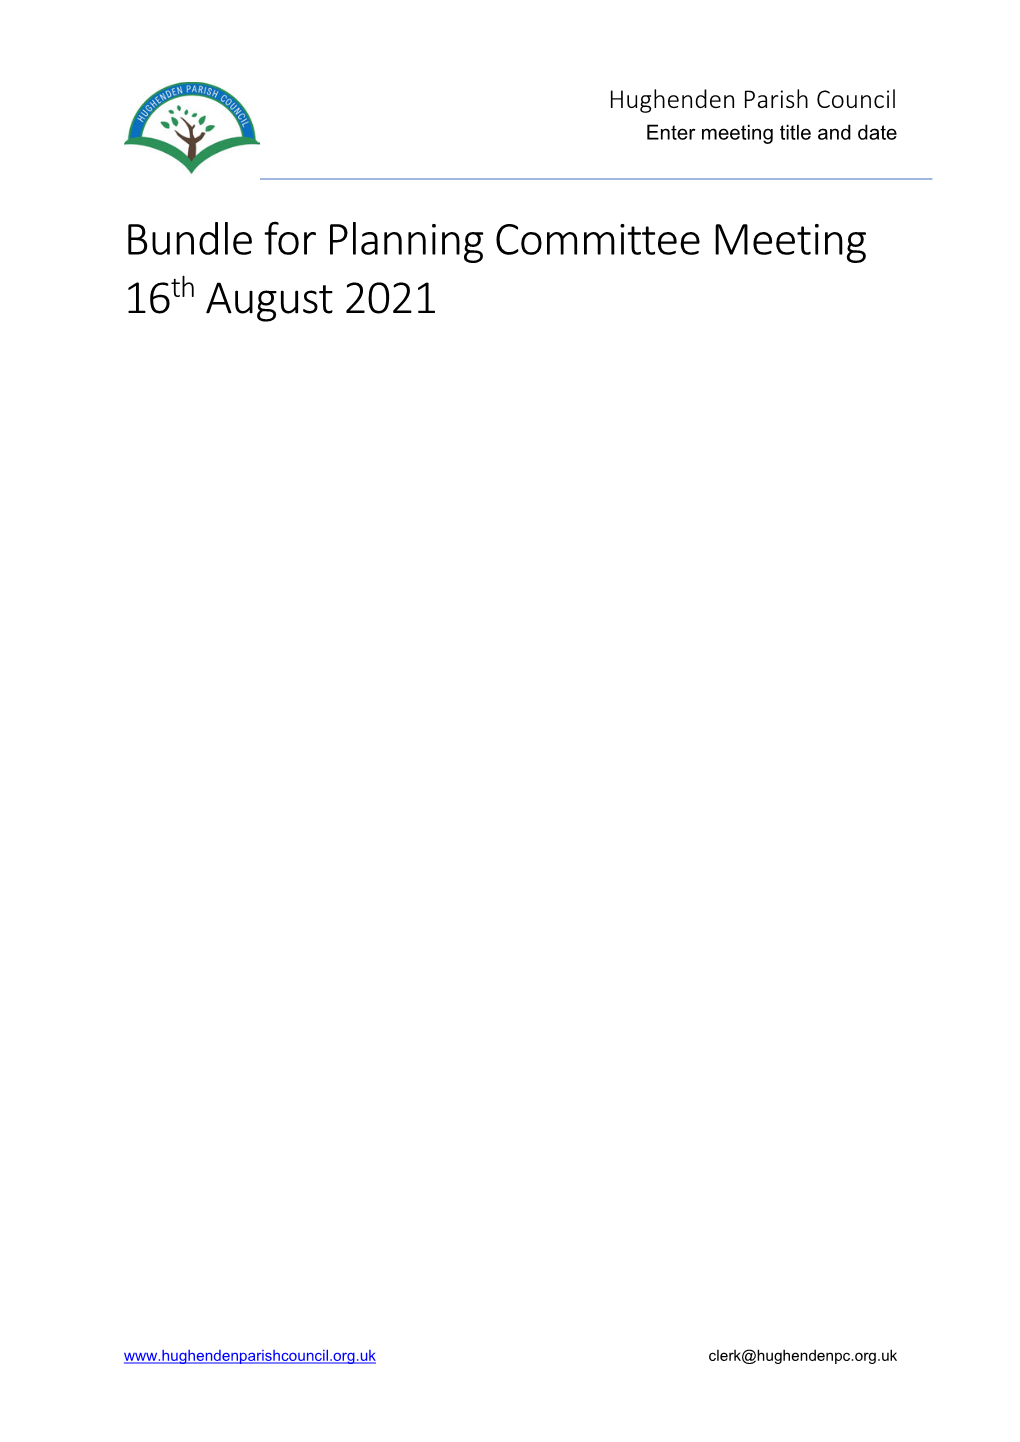 Bundle for Planning Committee Meeting 16Th August 2021